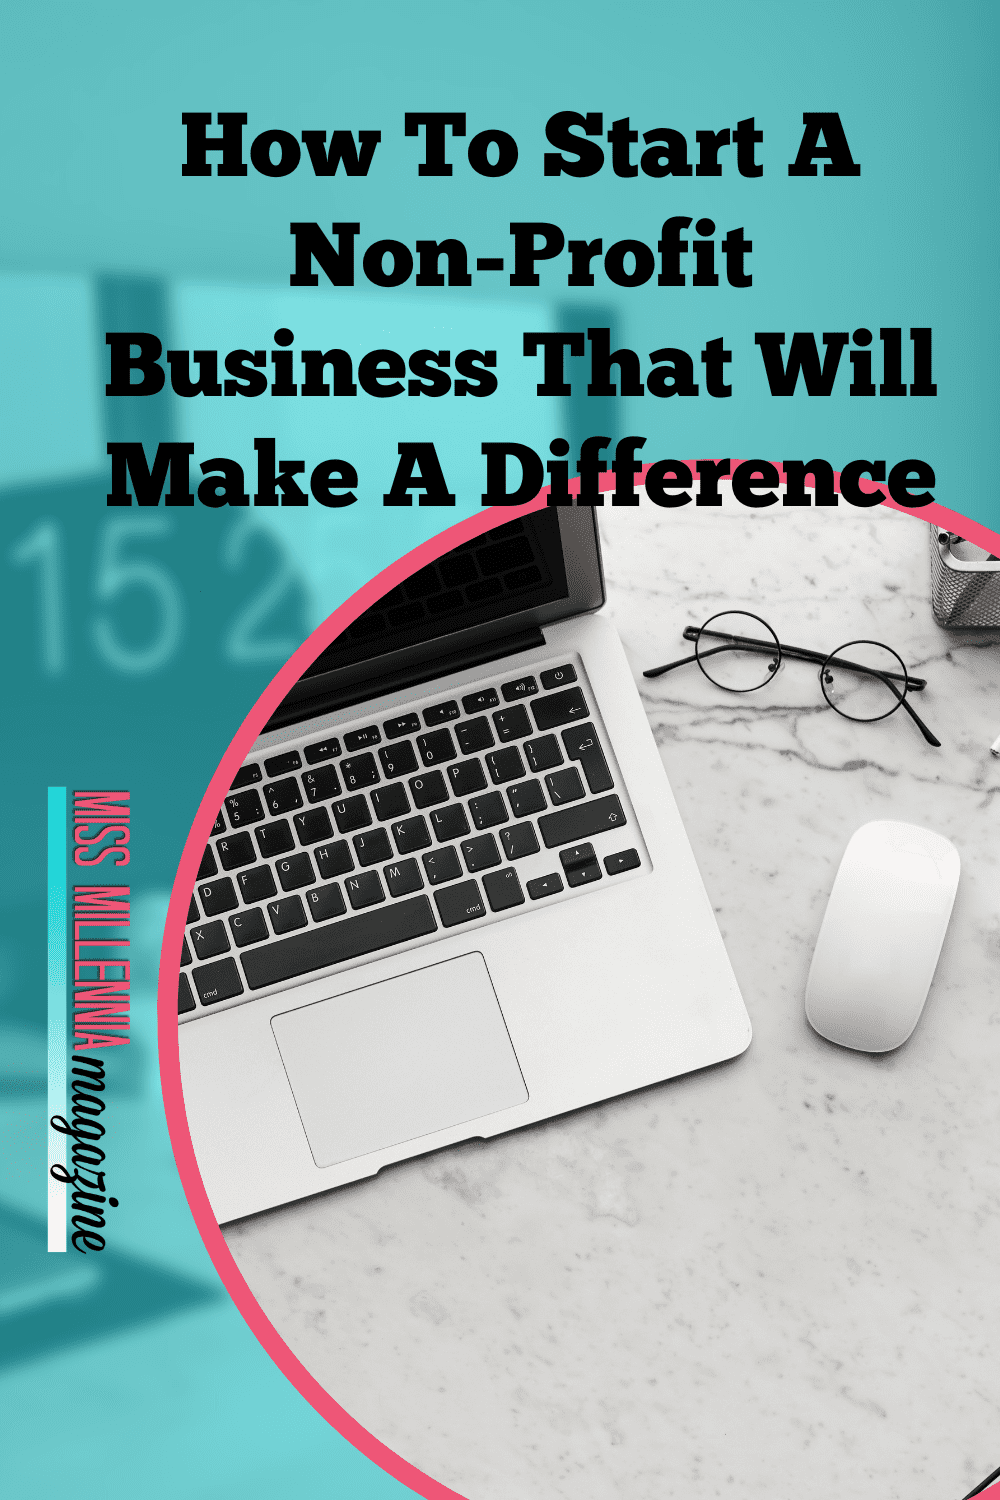 How To Start A Non-Profit Business That Will Make A Difference